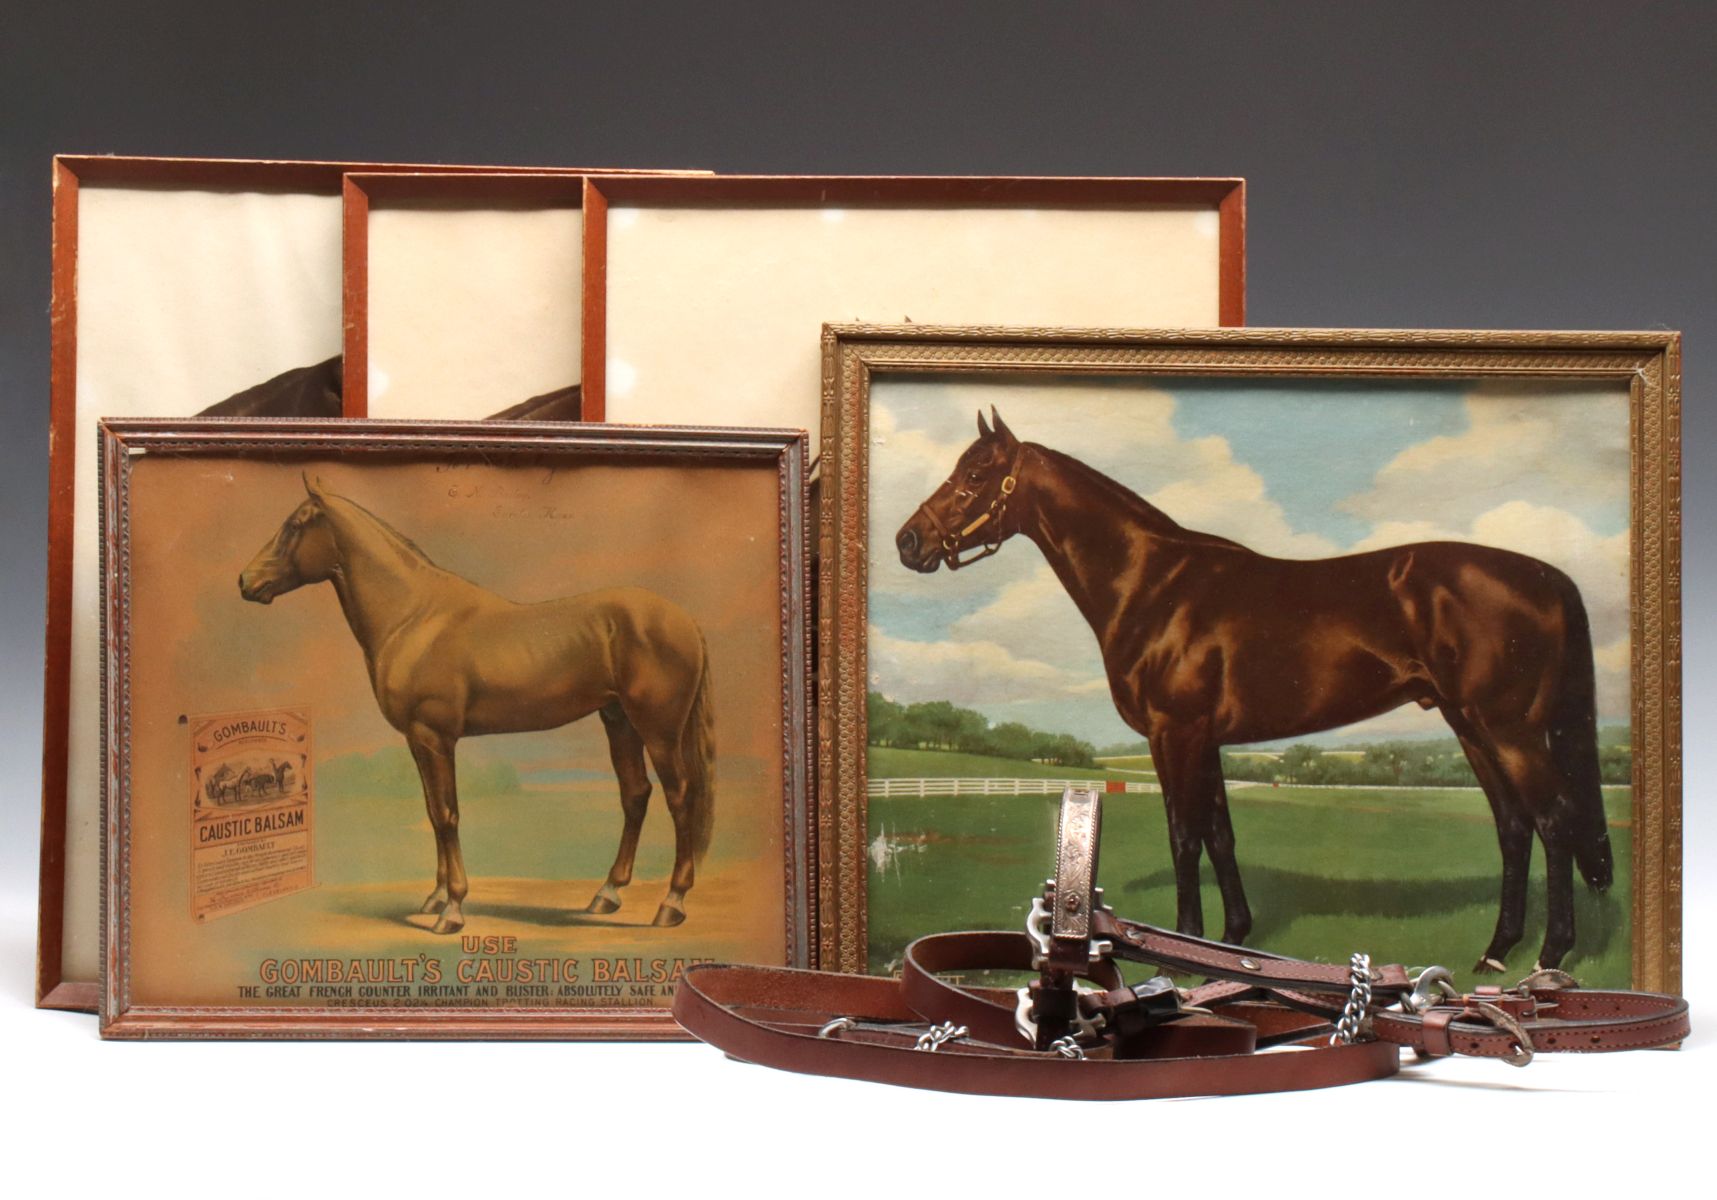 EQUESTRIAN PRINTS, ADVERTISING AND SILVER MOUNT BRIDLE